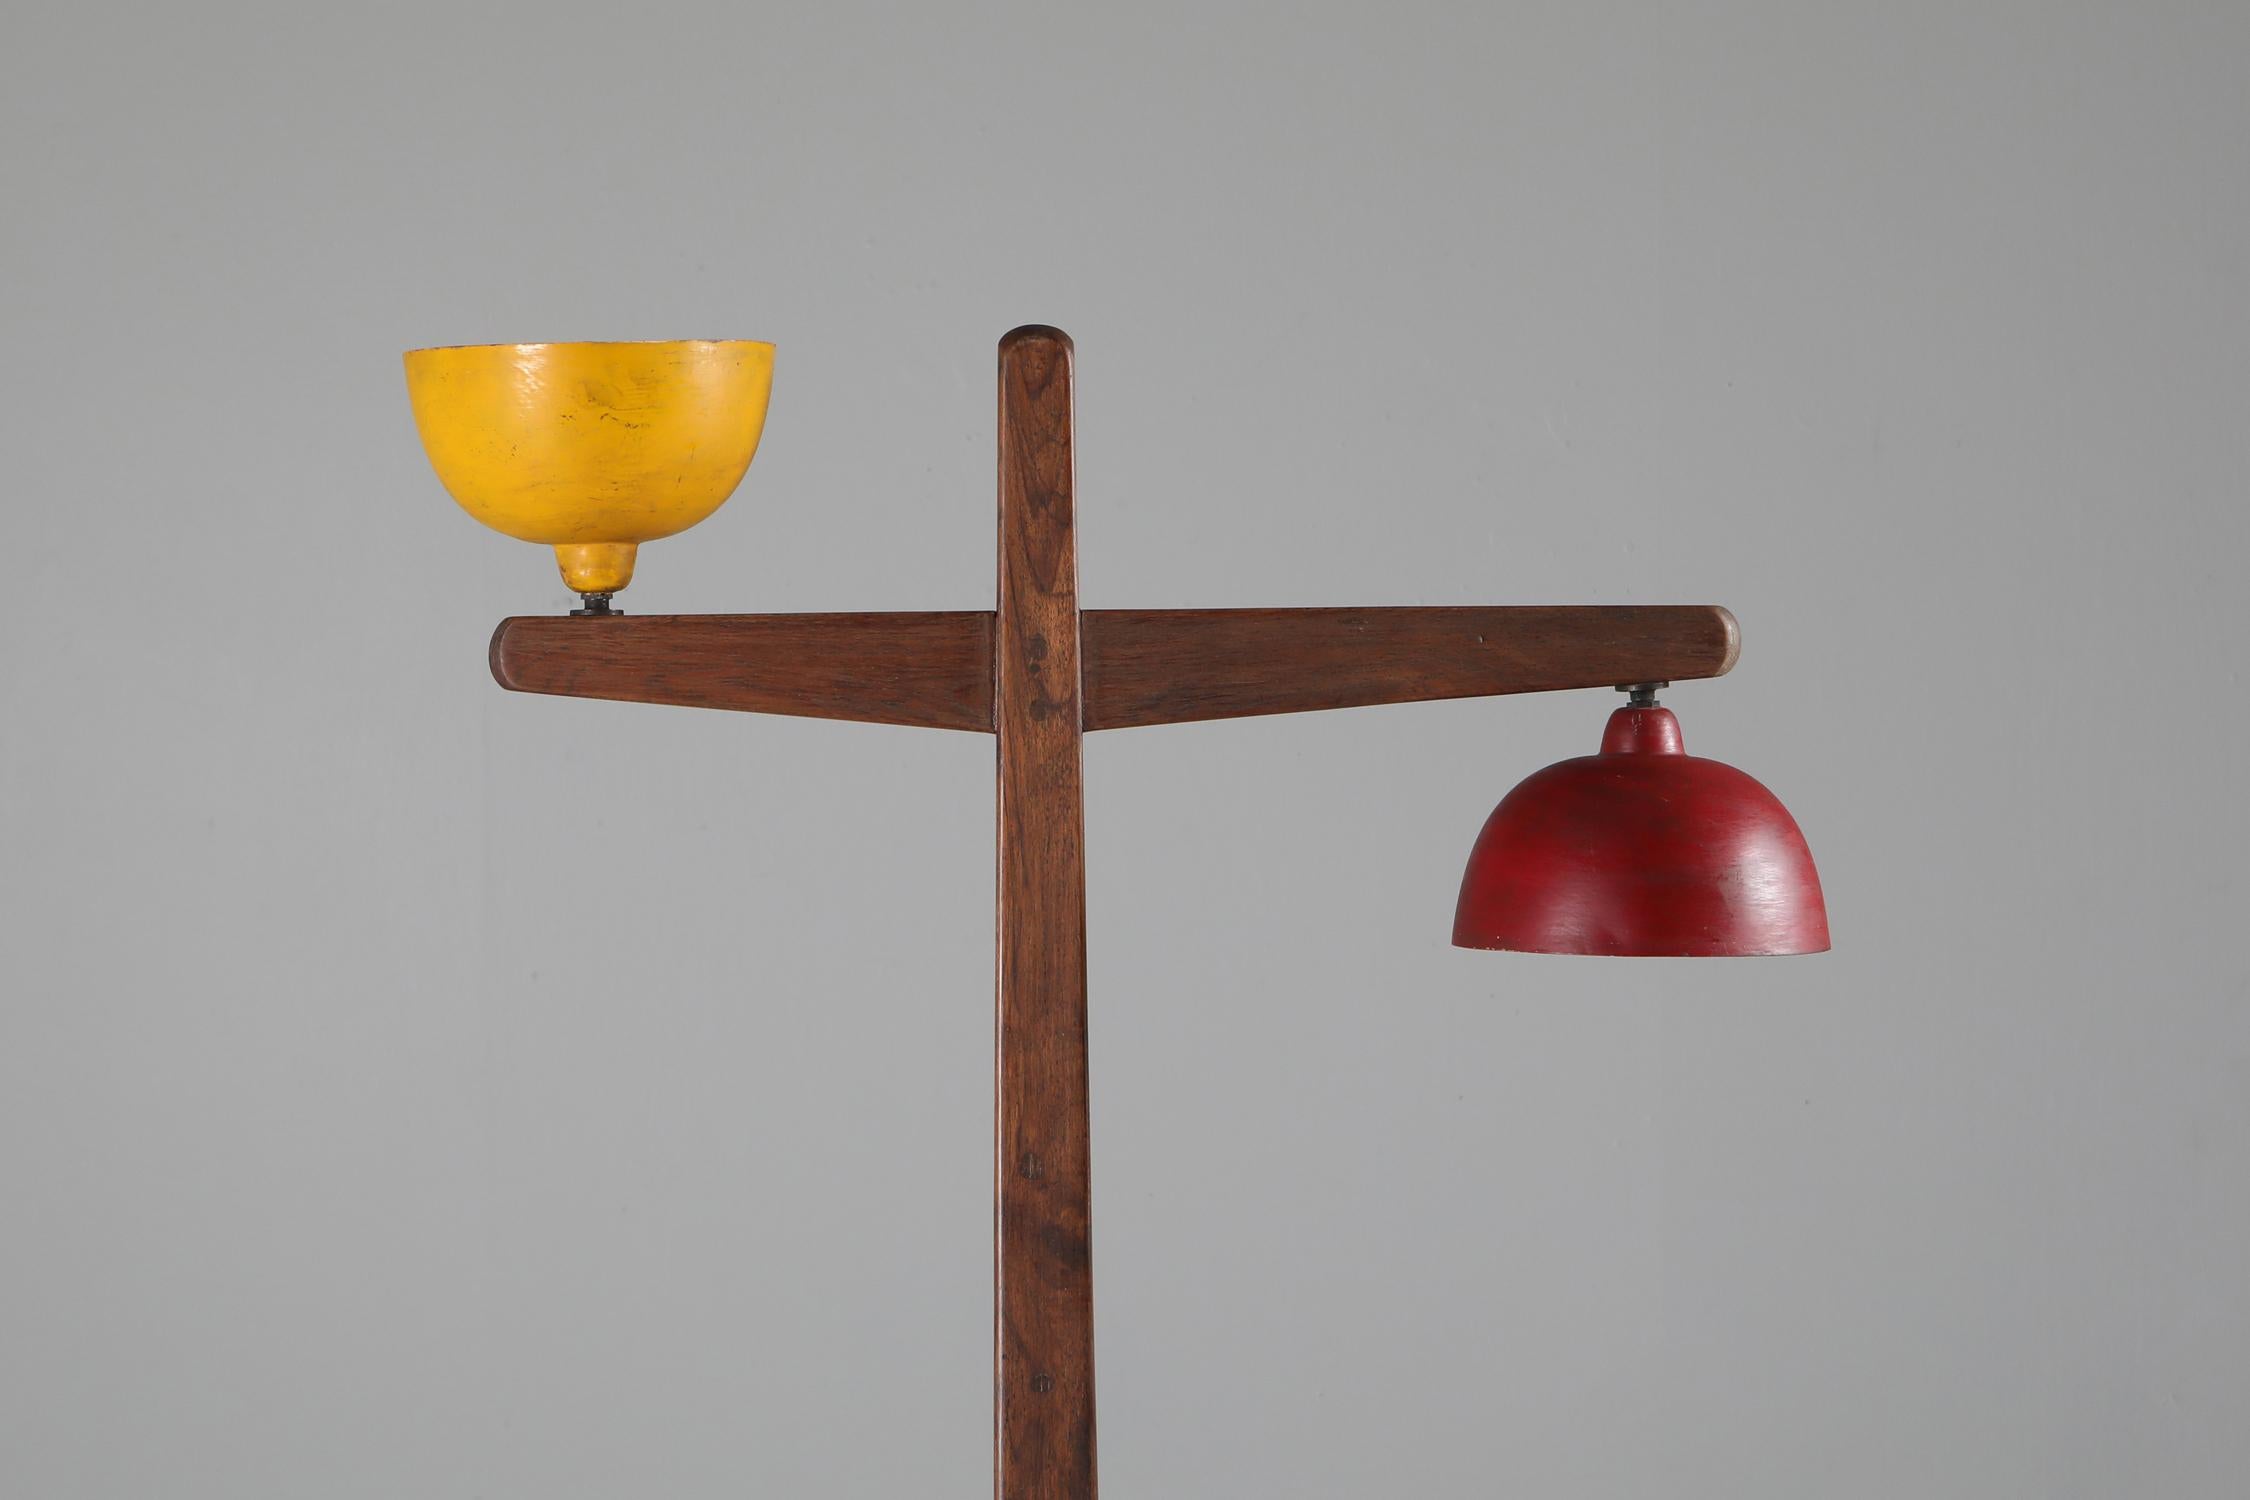 Pierre Jeanneret 'Standard Lamp' PJ-100101 in Solid Teak with Yellow Shade 4